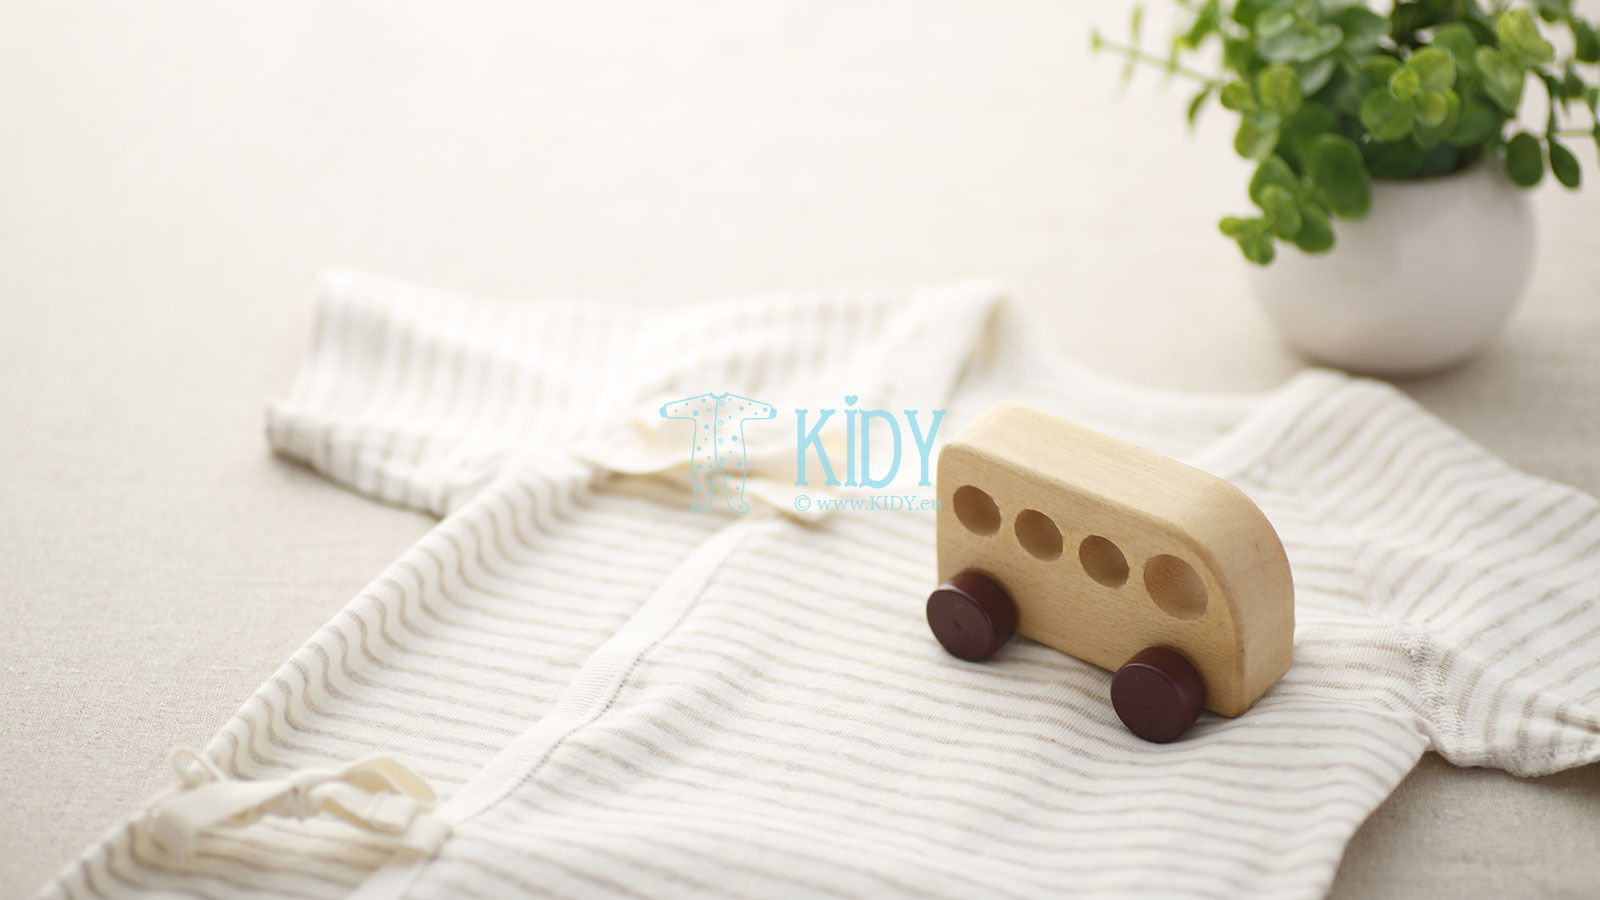 The best organic baby clothes from natural fabrics and environmentally friendly materials are now available in our online store!